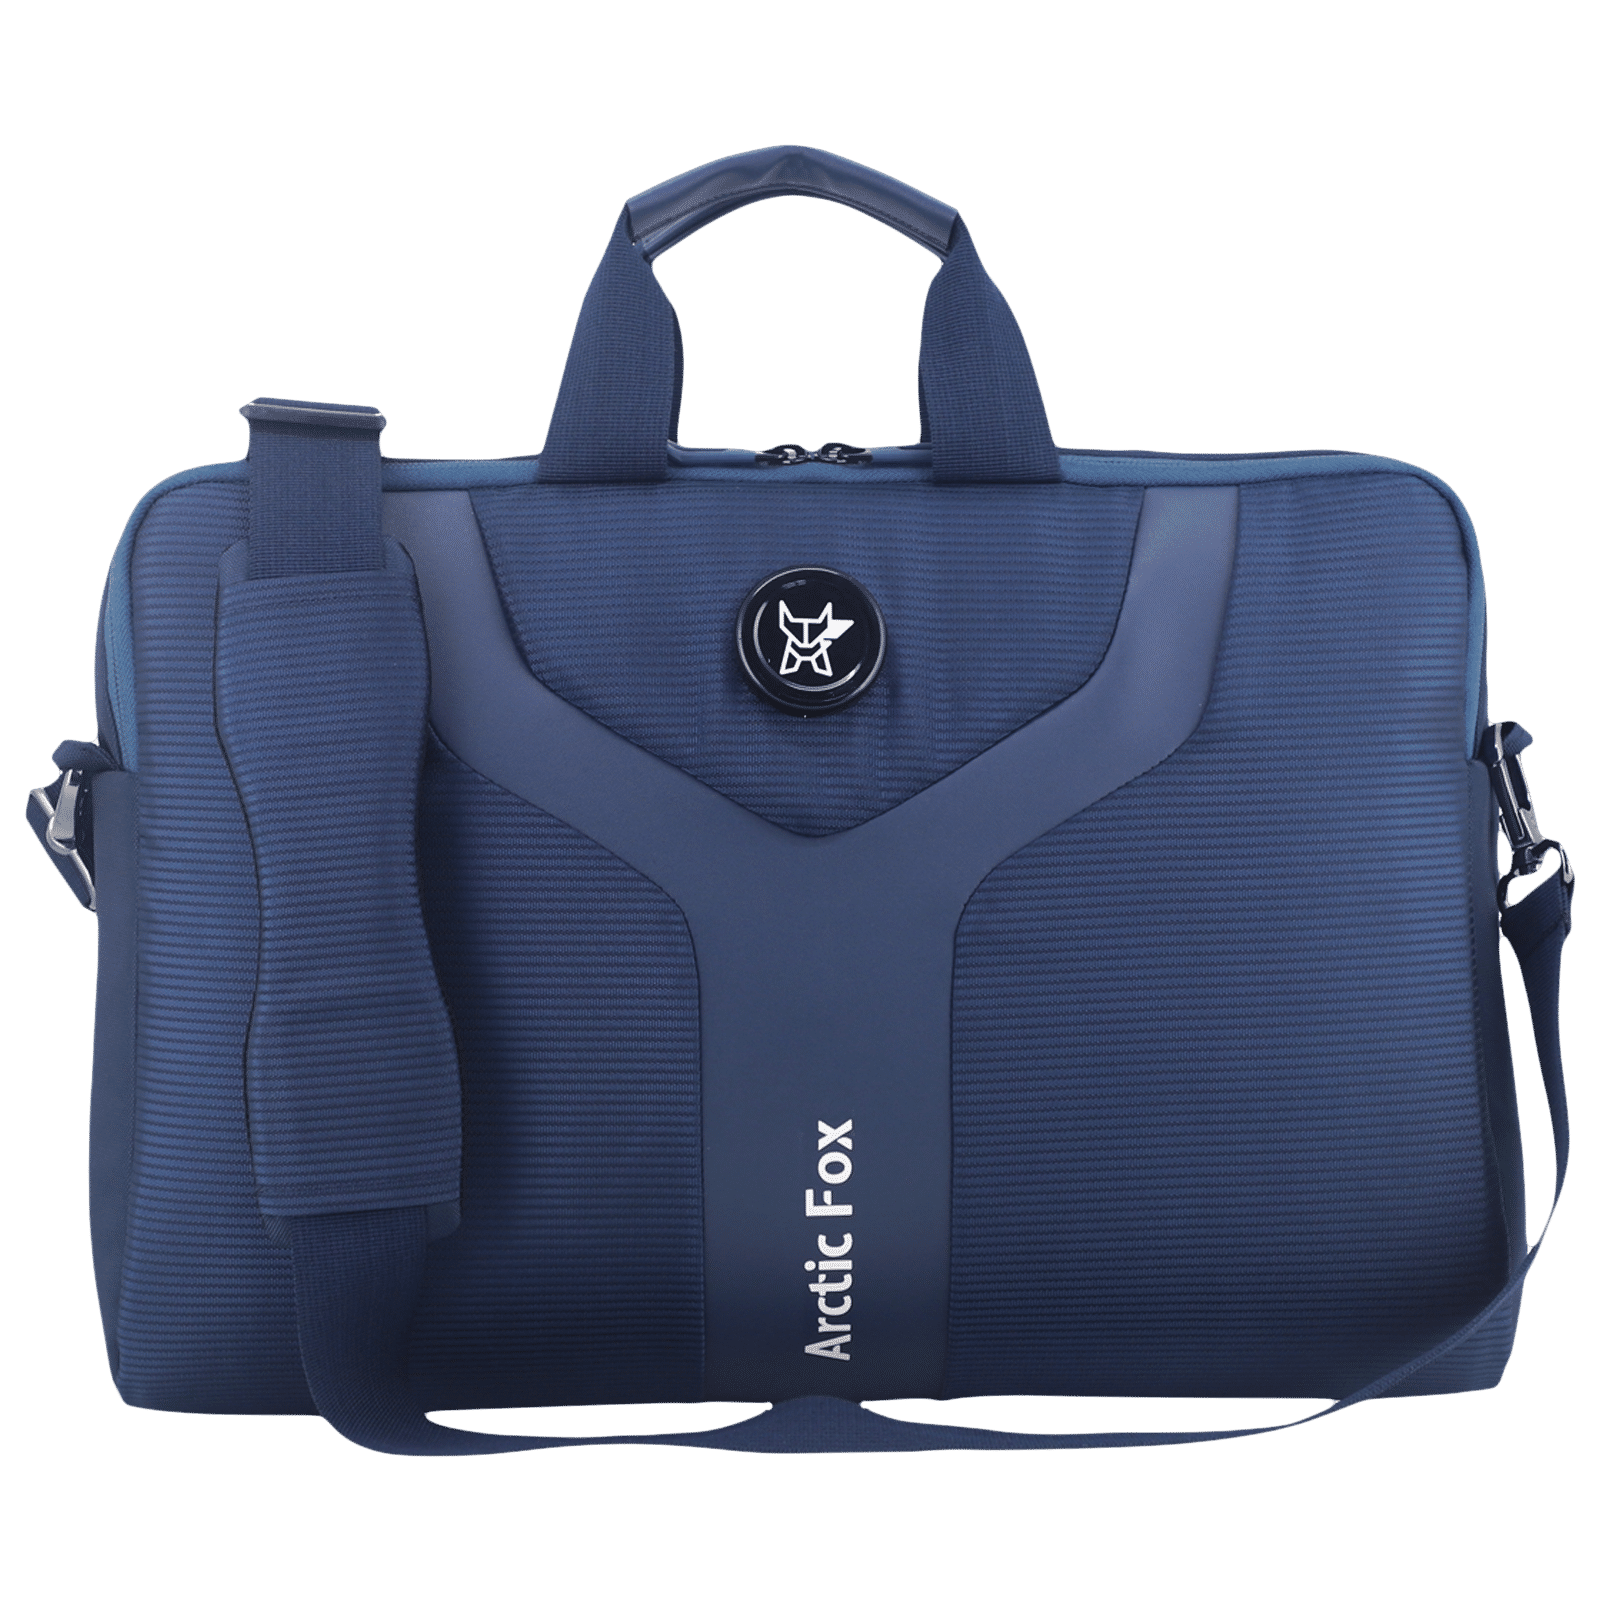 Buy Arctic Fox Honor Polyester Laptop Backpack for 15.5 Inch Laptop (35 L,  Adjustable Straps, Castel Rock) Online - Croma